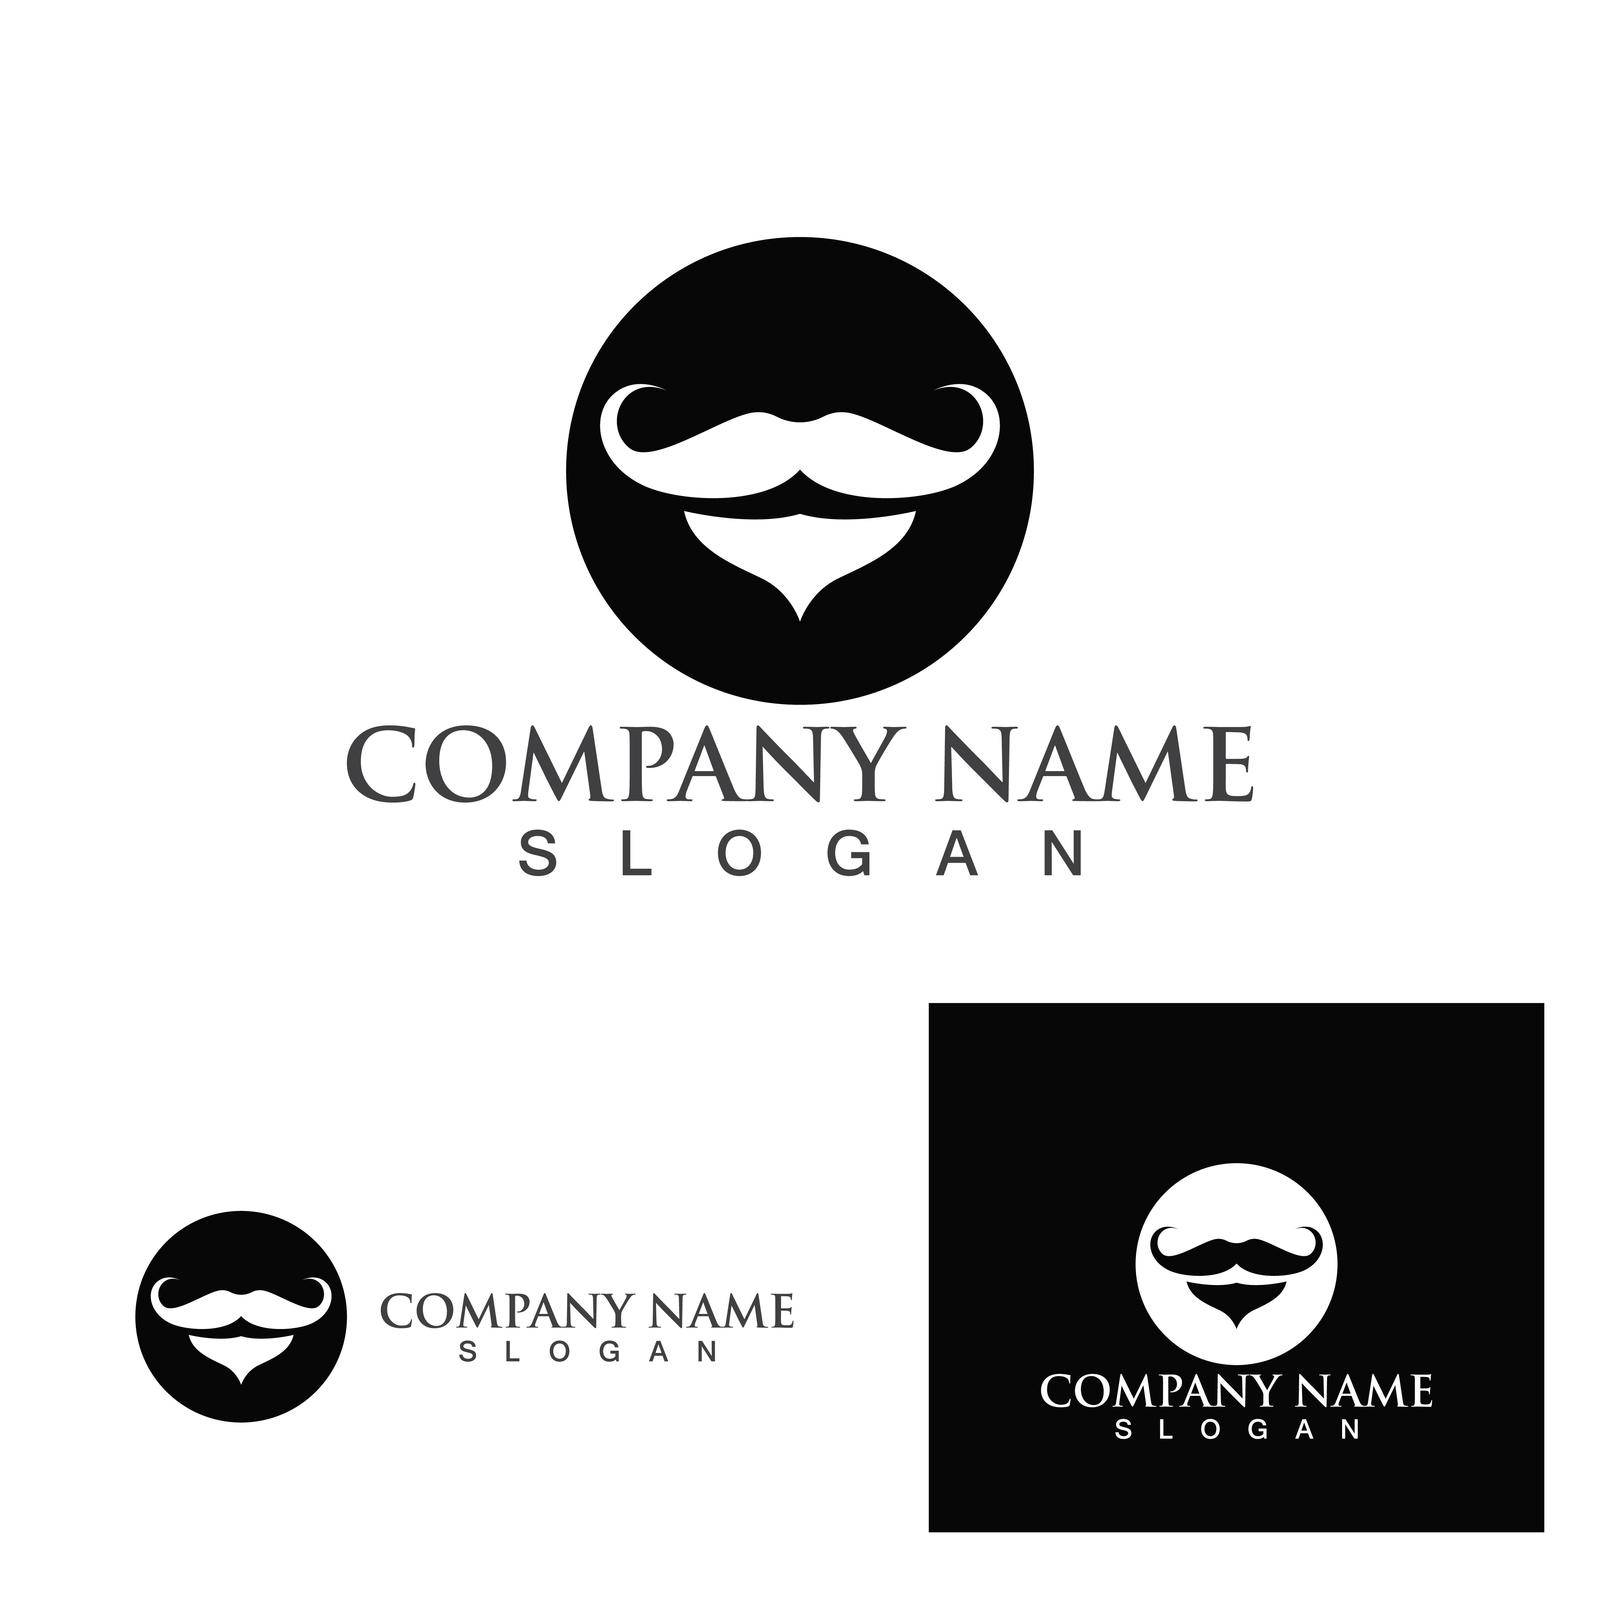 Mustache and beard logo and symbol by Mrsongrphc